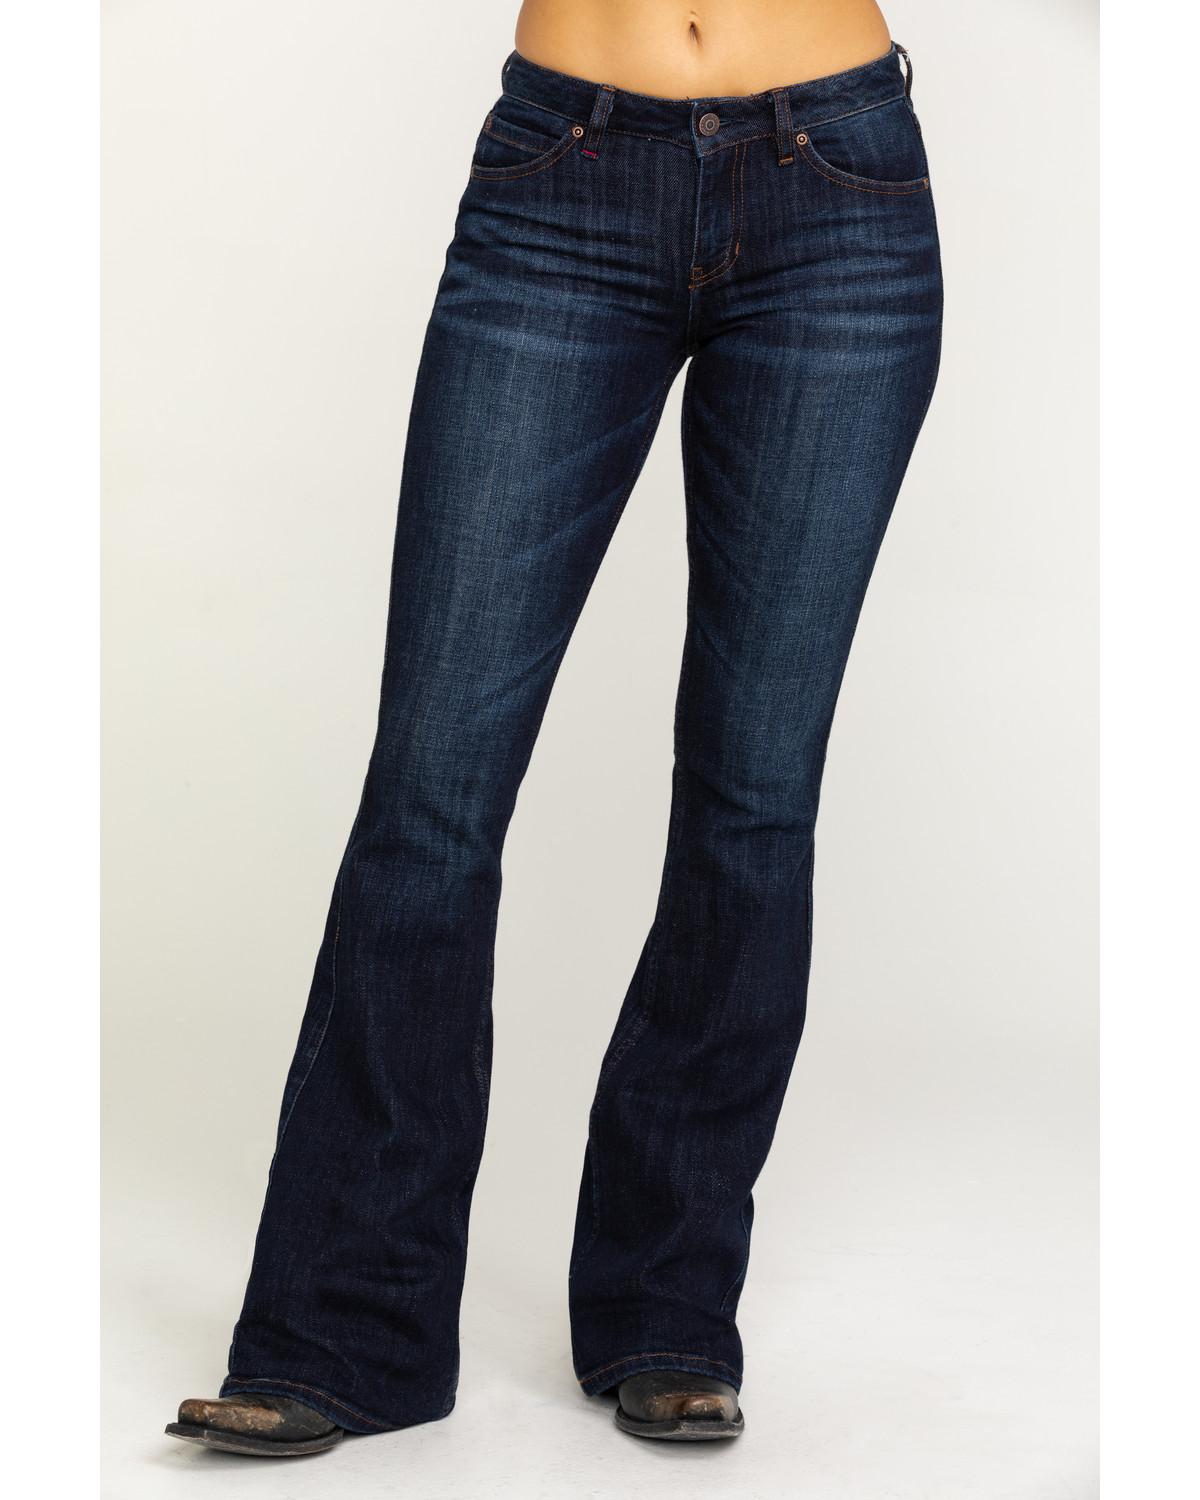 Idyllwind Women's The Rebel Bootcut Jeans - Dark Wash - Country Outfitter